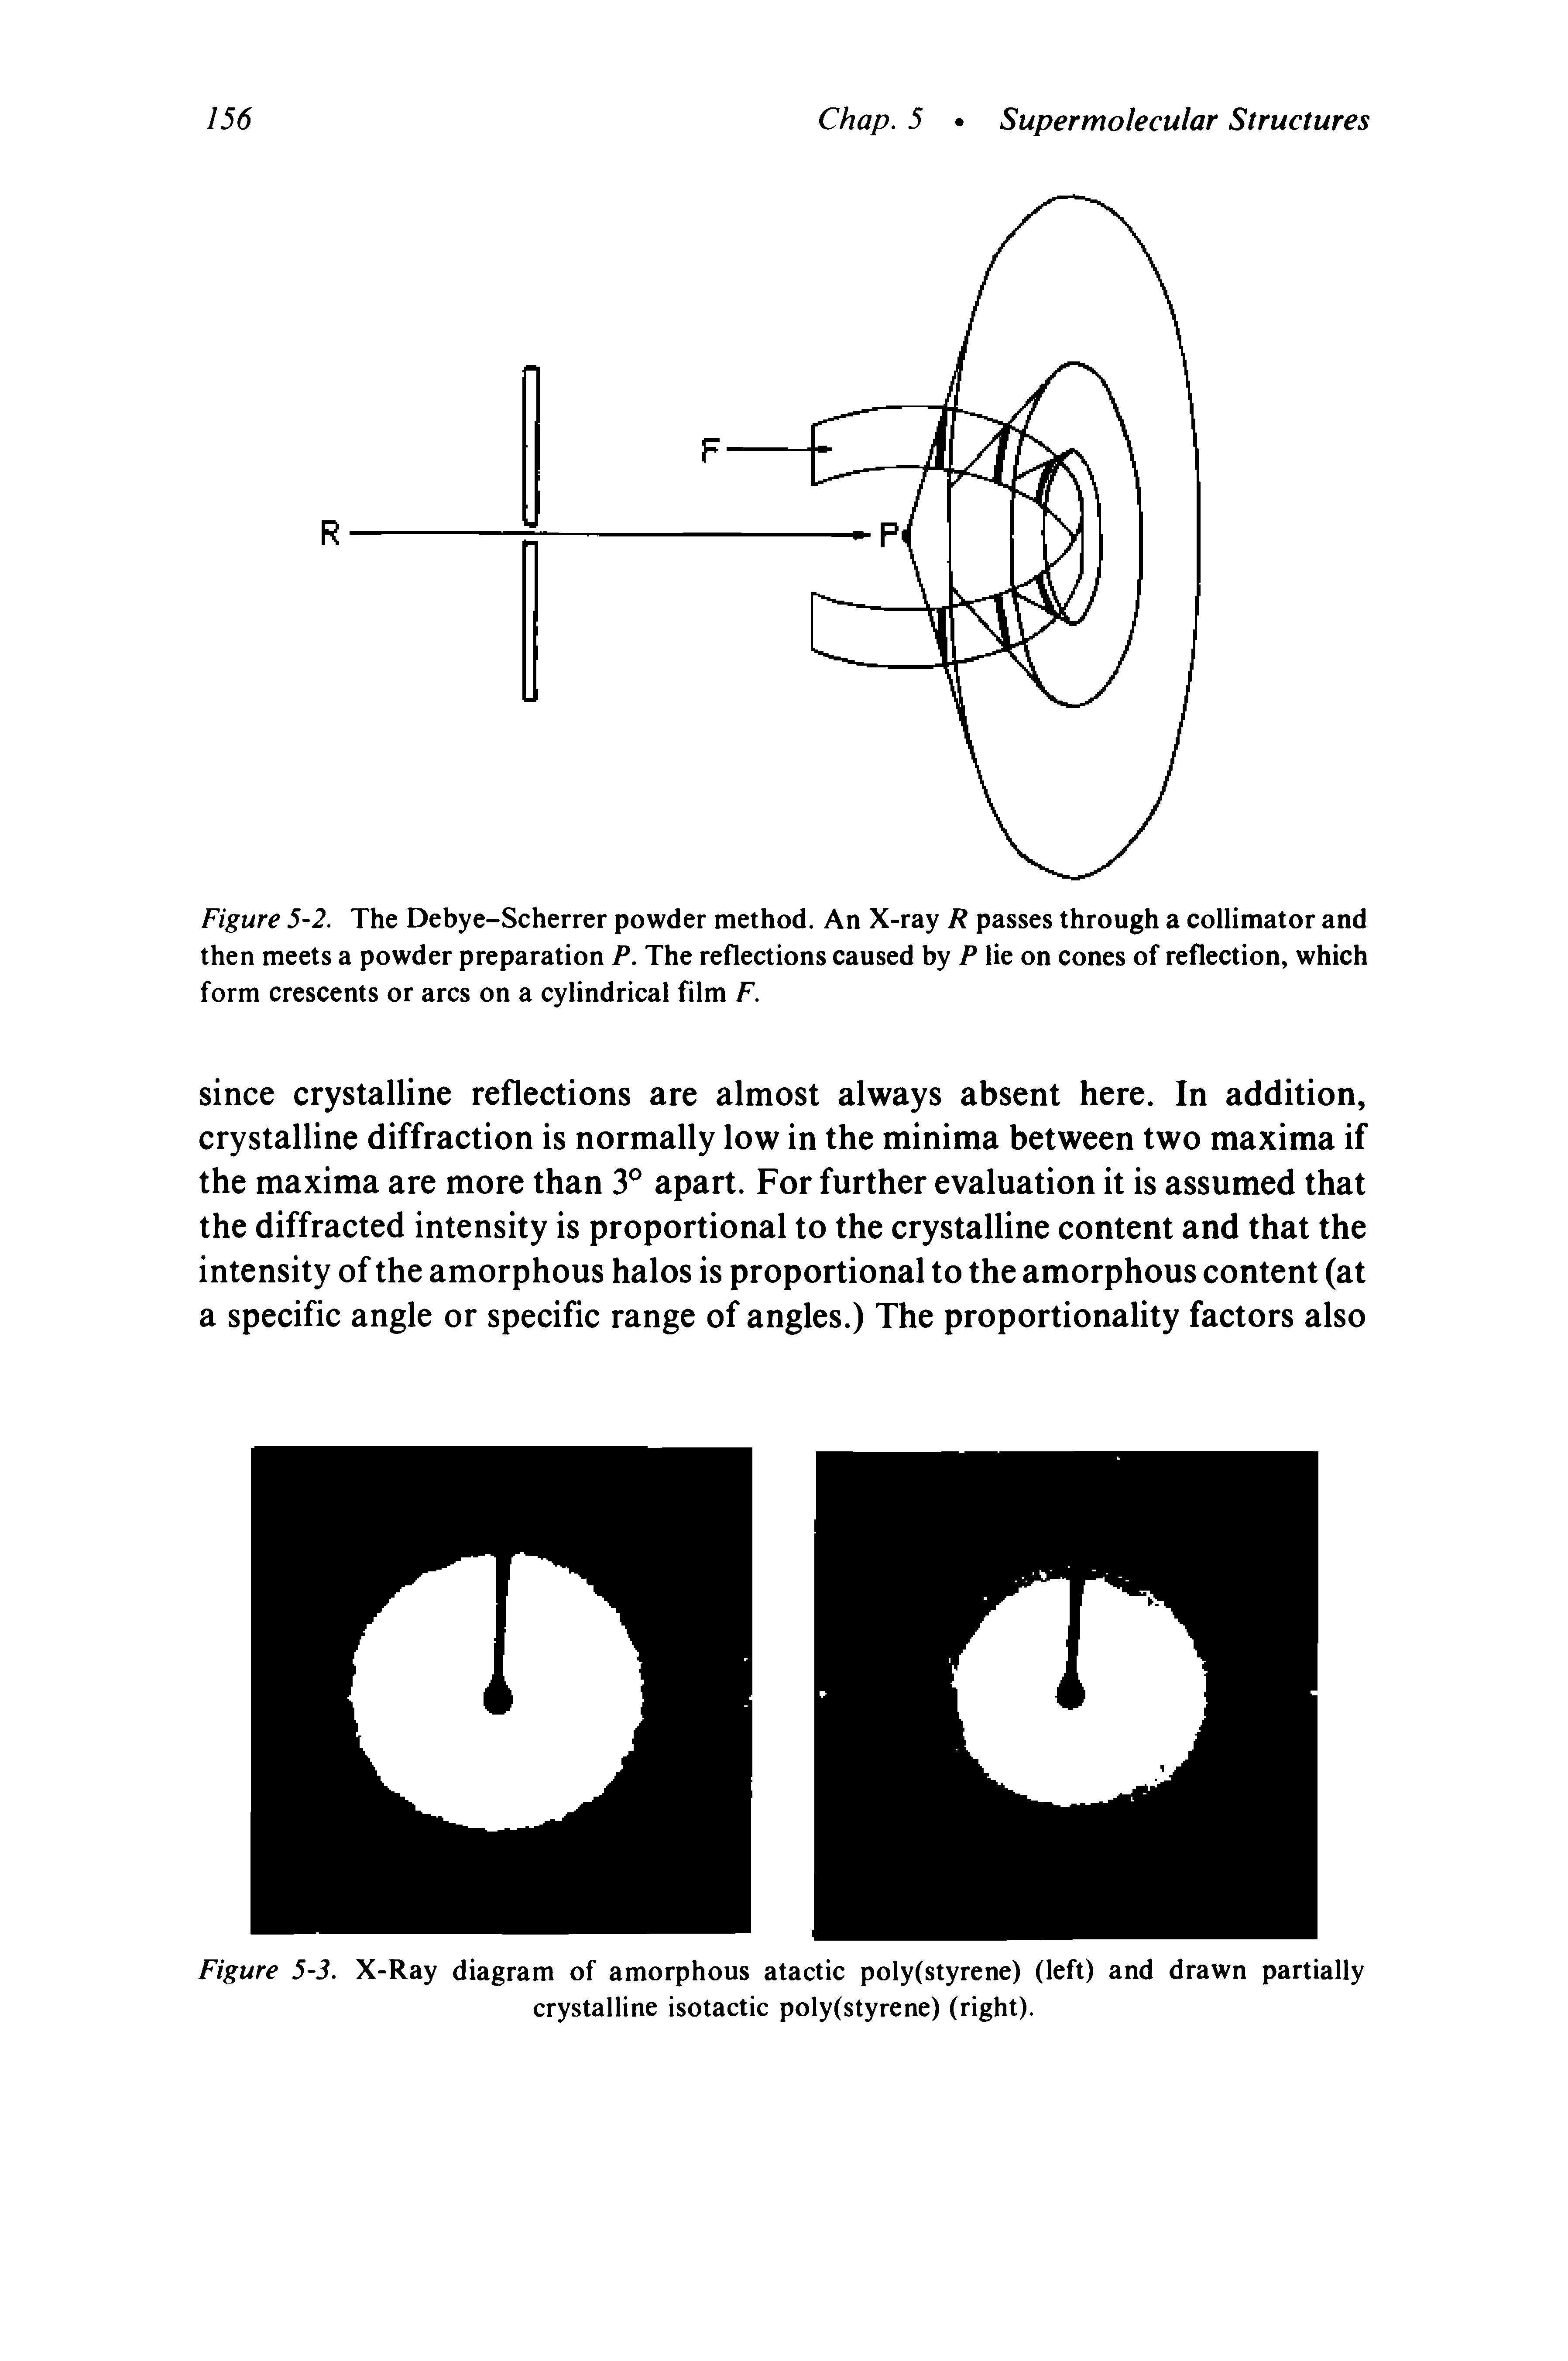 Figure 5 2. The Debye-Scherrer powder method. An X-ray R passes through a collimator and then meets a powder preparation P. The reflections caused by P lie on cones of reflection, which form crescents or arcs on a cylindrical film F.